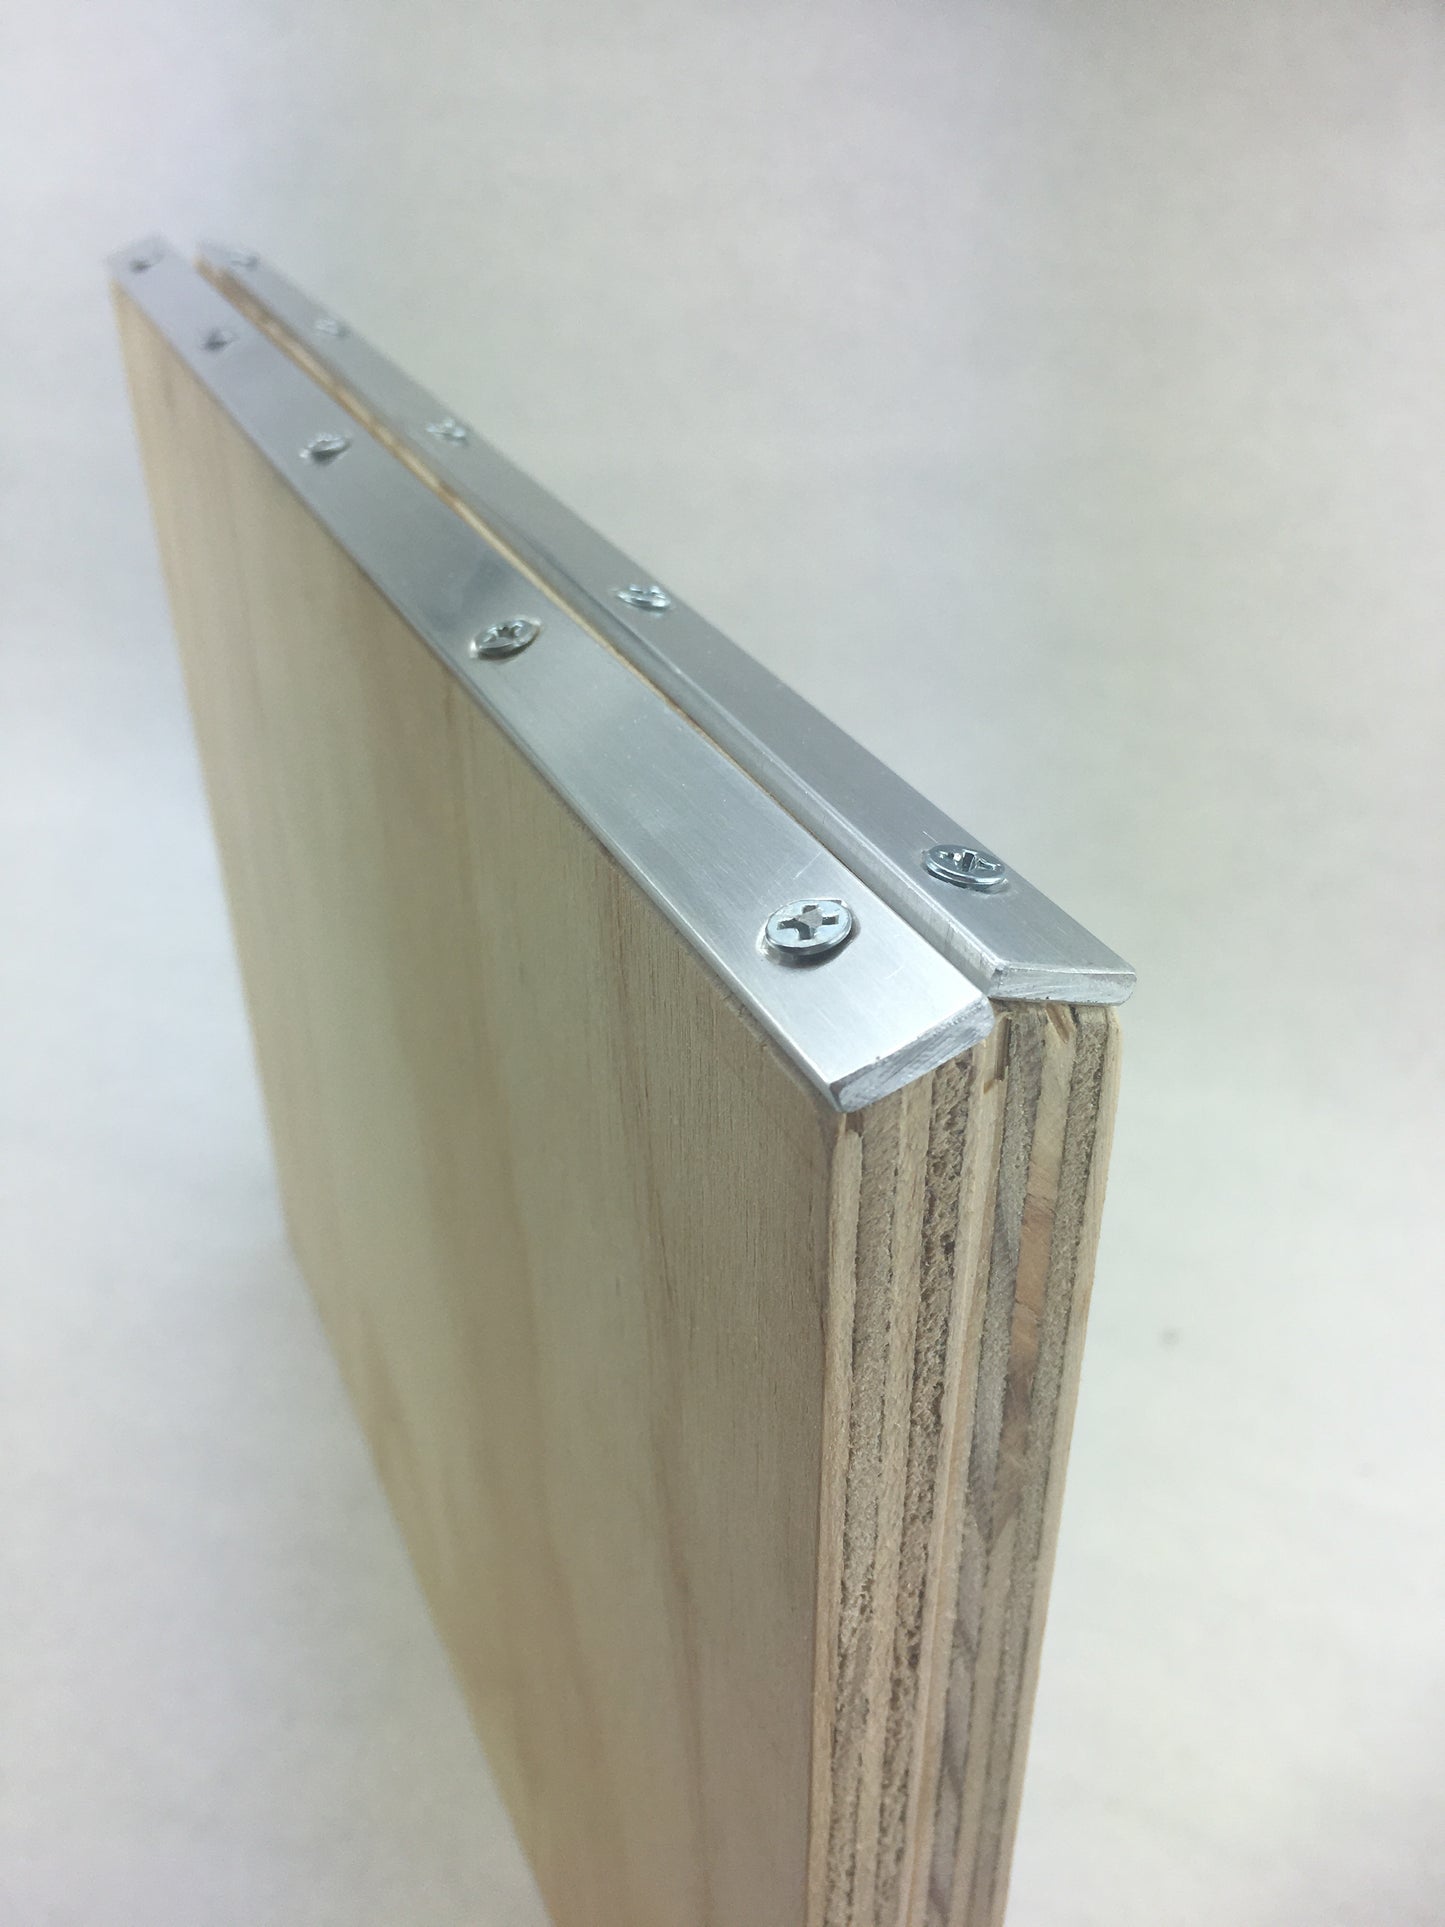 TBB Bookbinding Backing boards- A set two boards